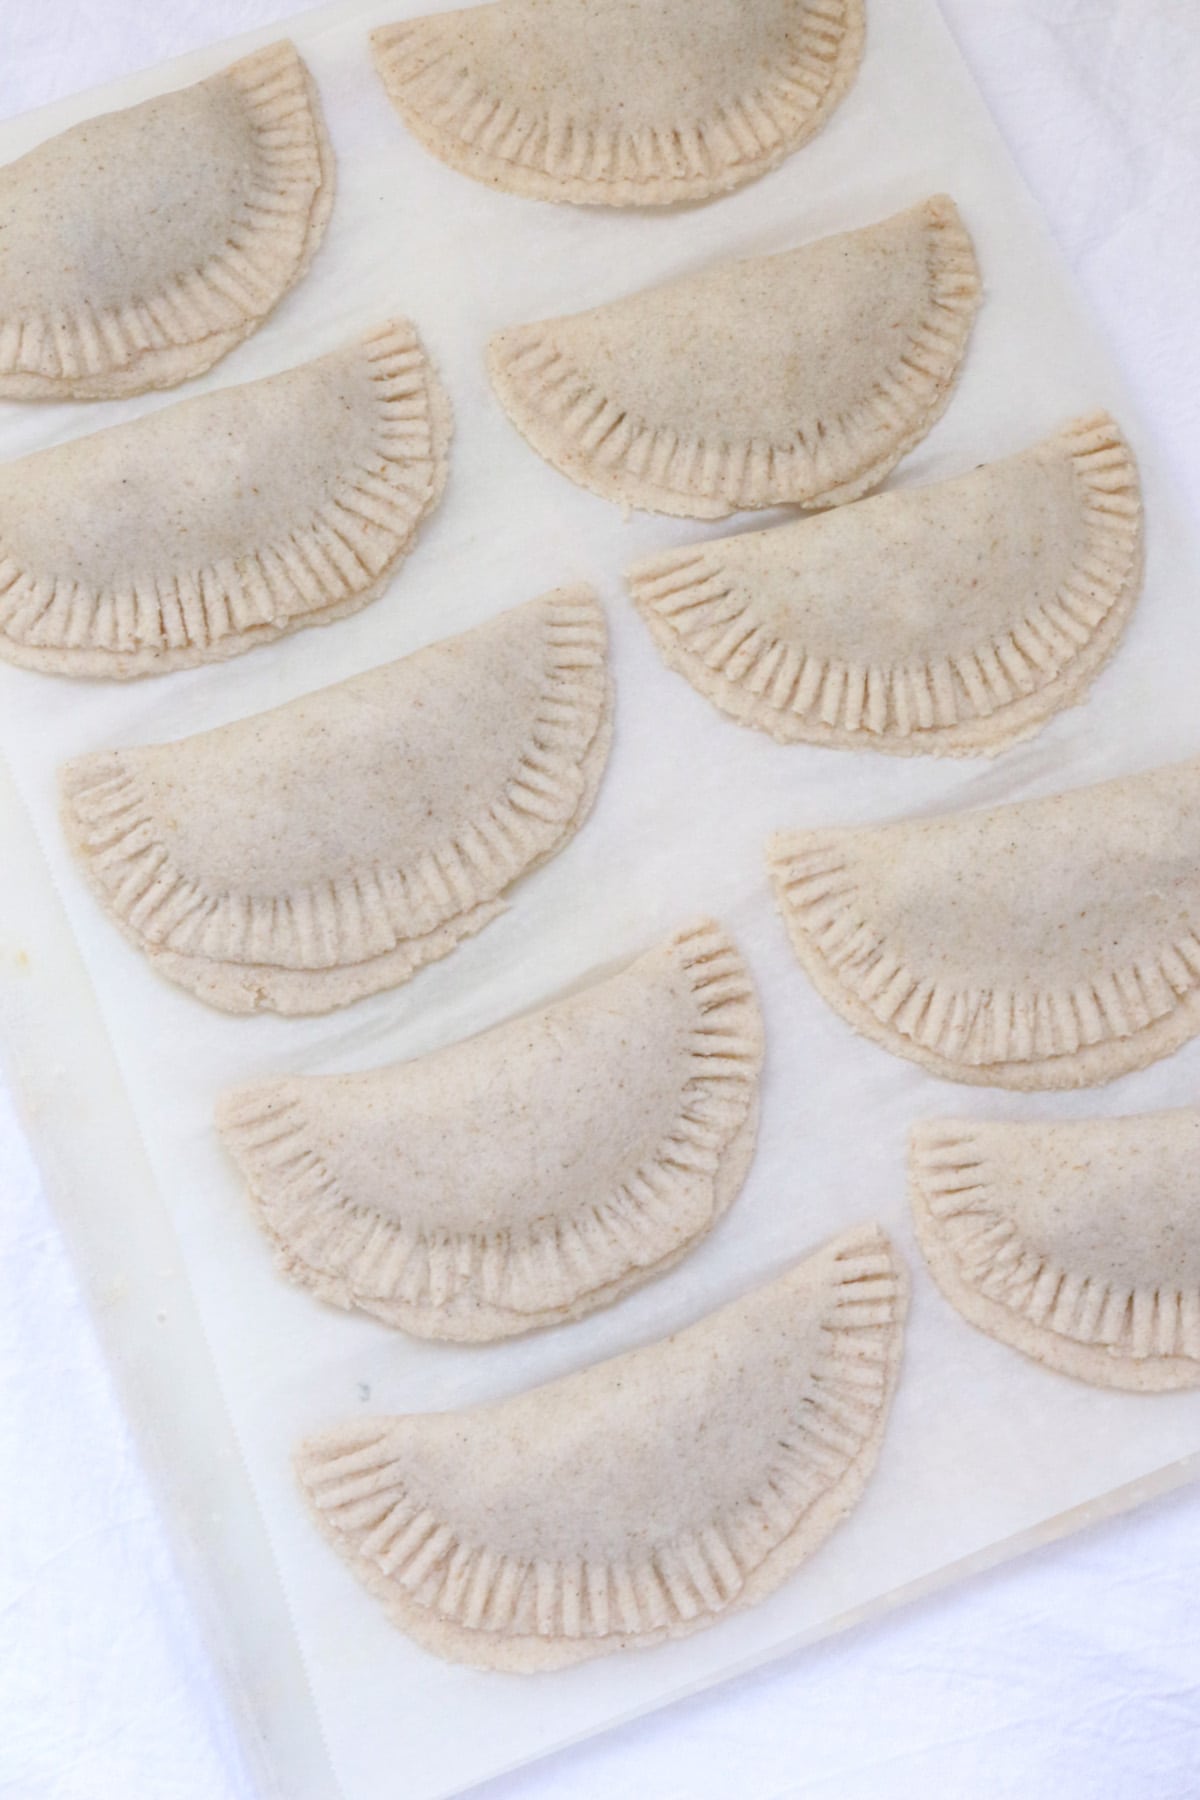 Gluten-free empanadas ready to be fried, sitting on a piece of parchment paper